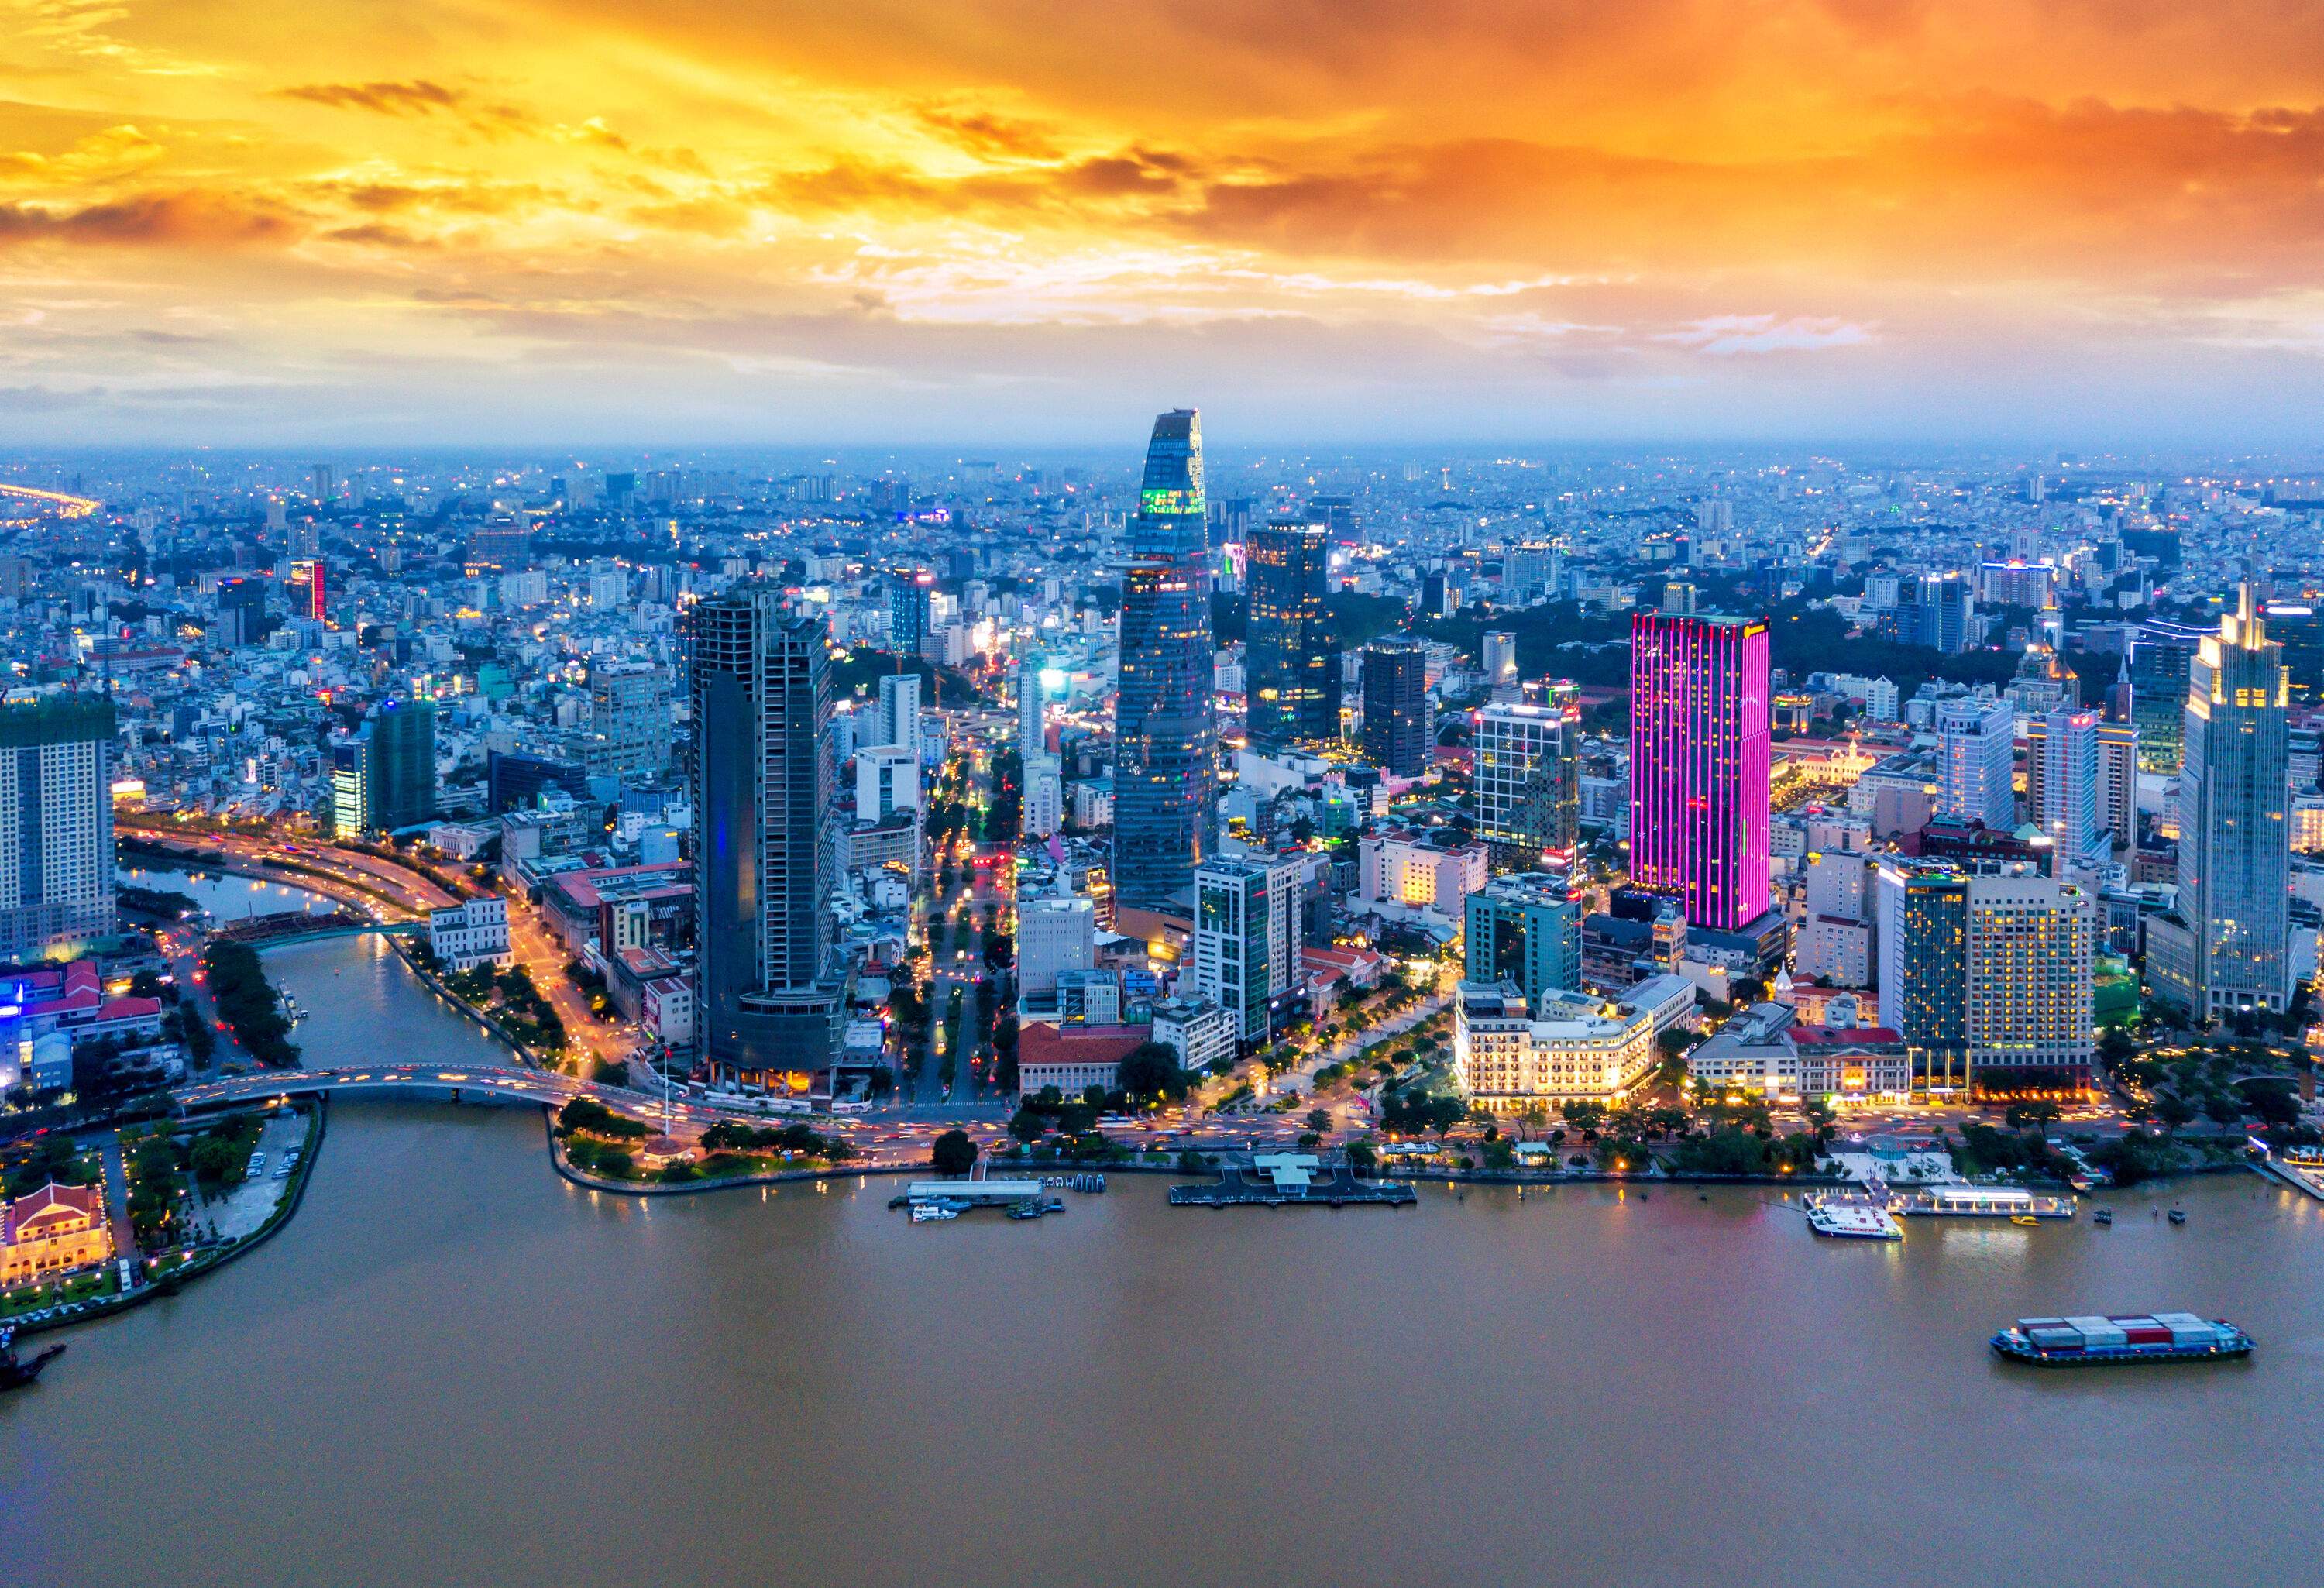 Aerial view of a brightly lit city with modern towering buildings by the river under the scenic orangy twilight sky.